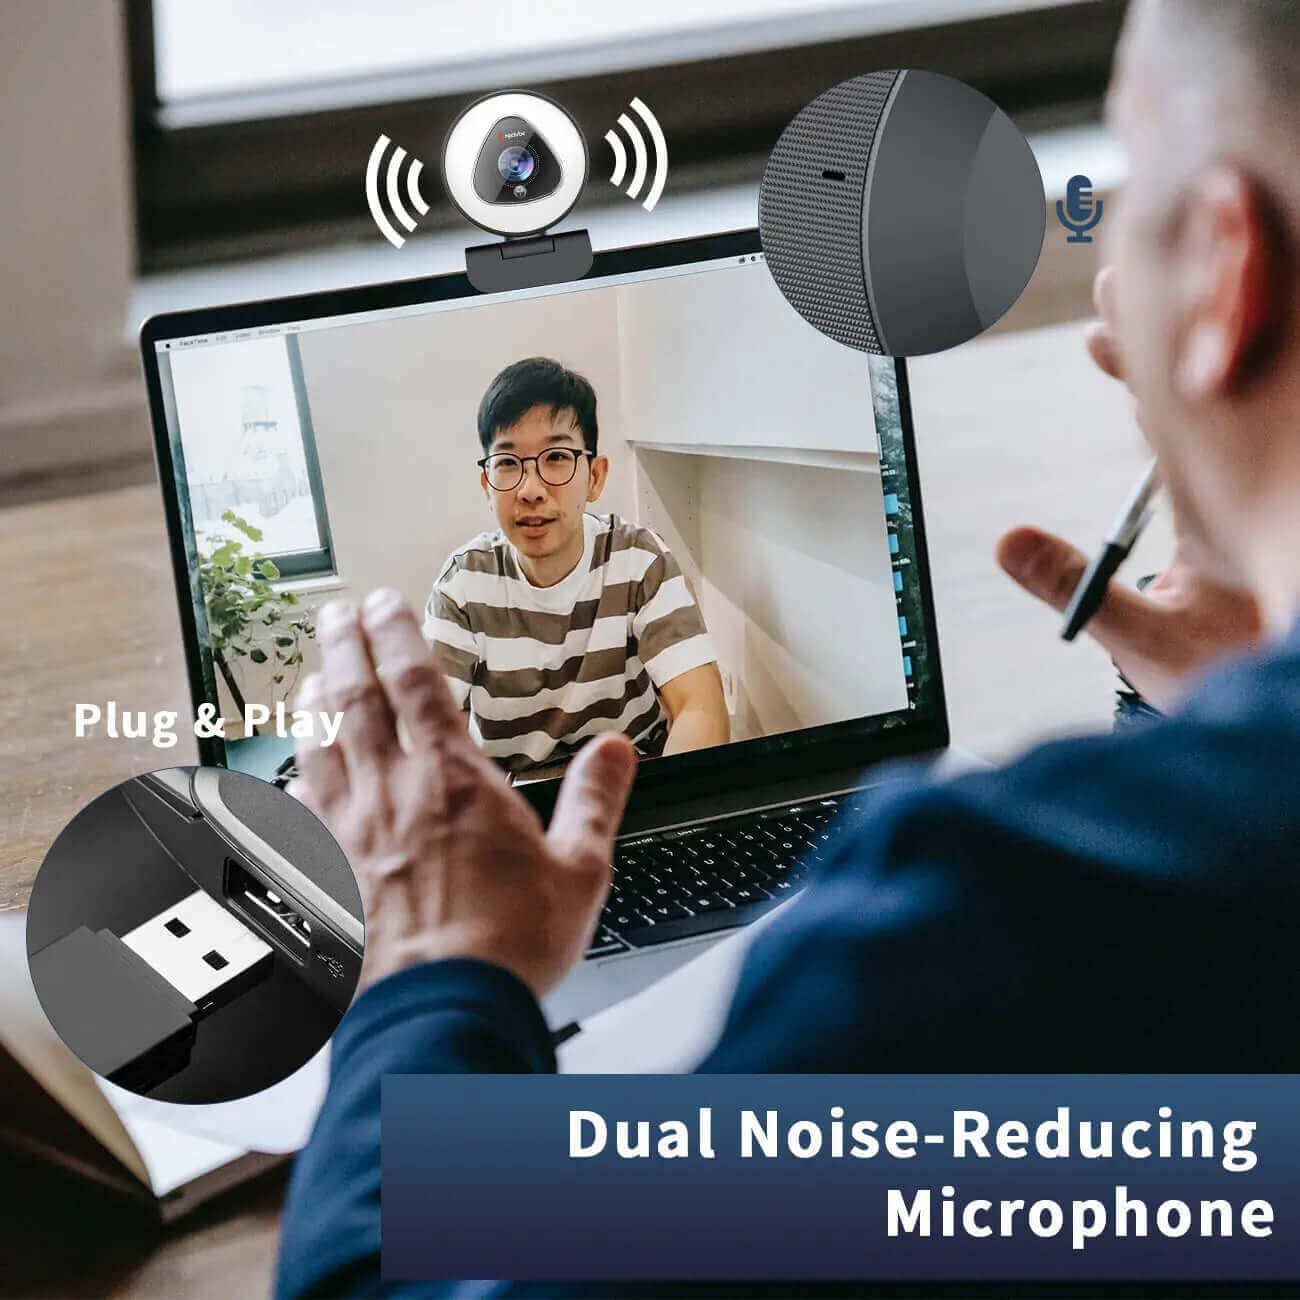 Dual Noise-Reducing Microphone